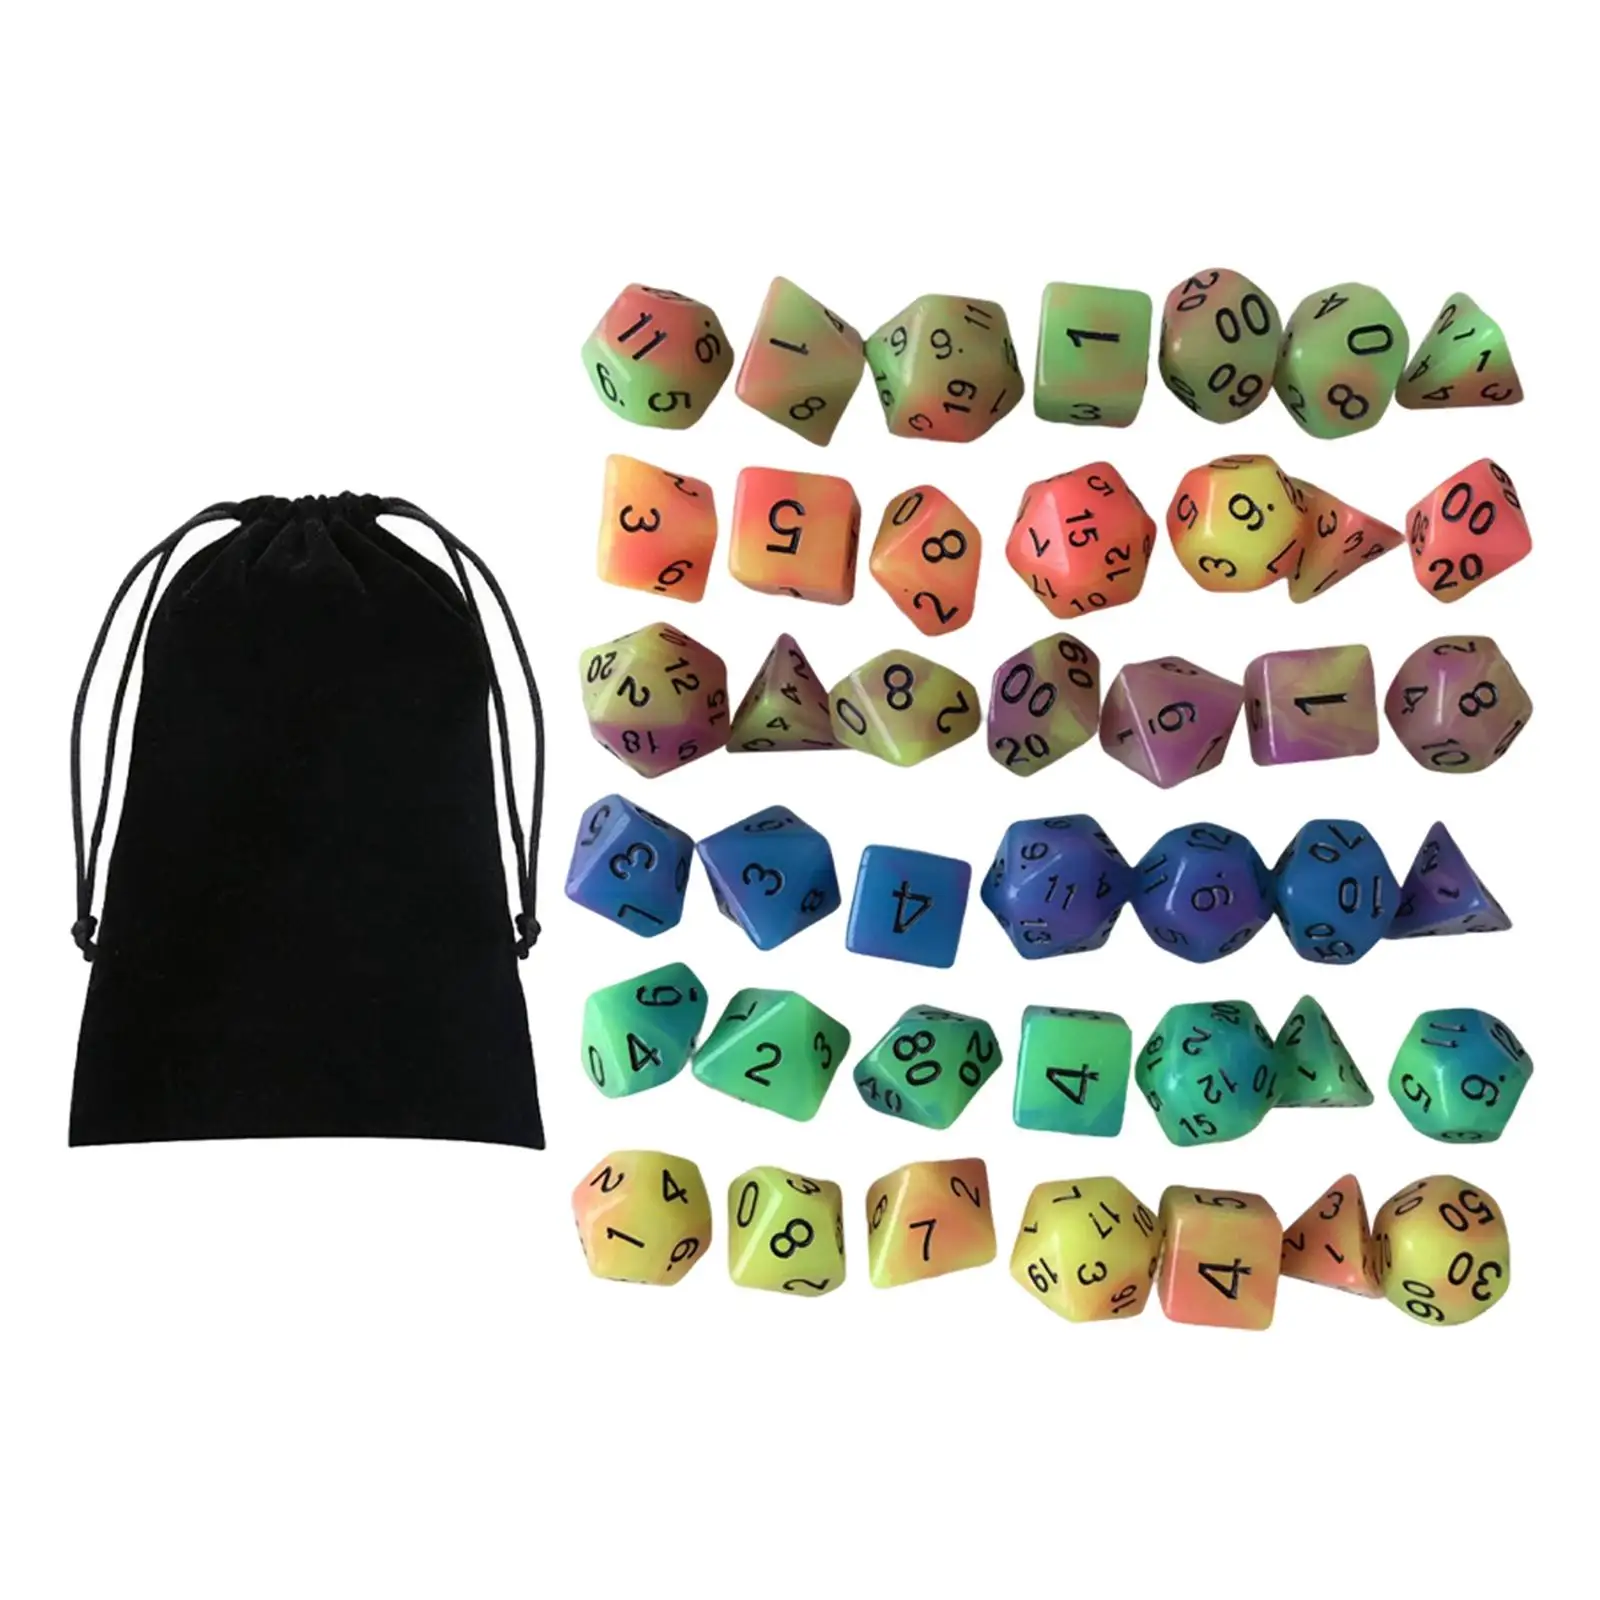 Luminous RPG Dice Set Bar Toys Glowing Polyhedral Dices Set for MTG